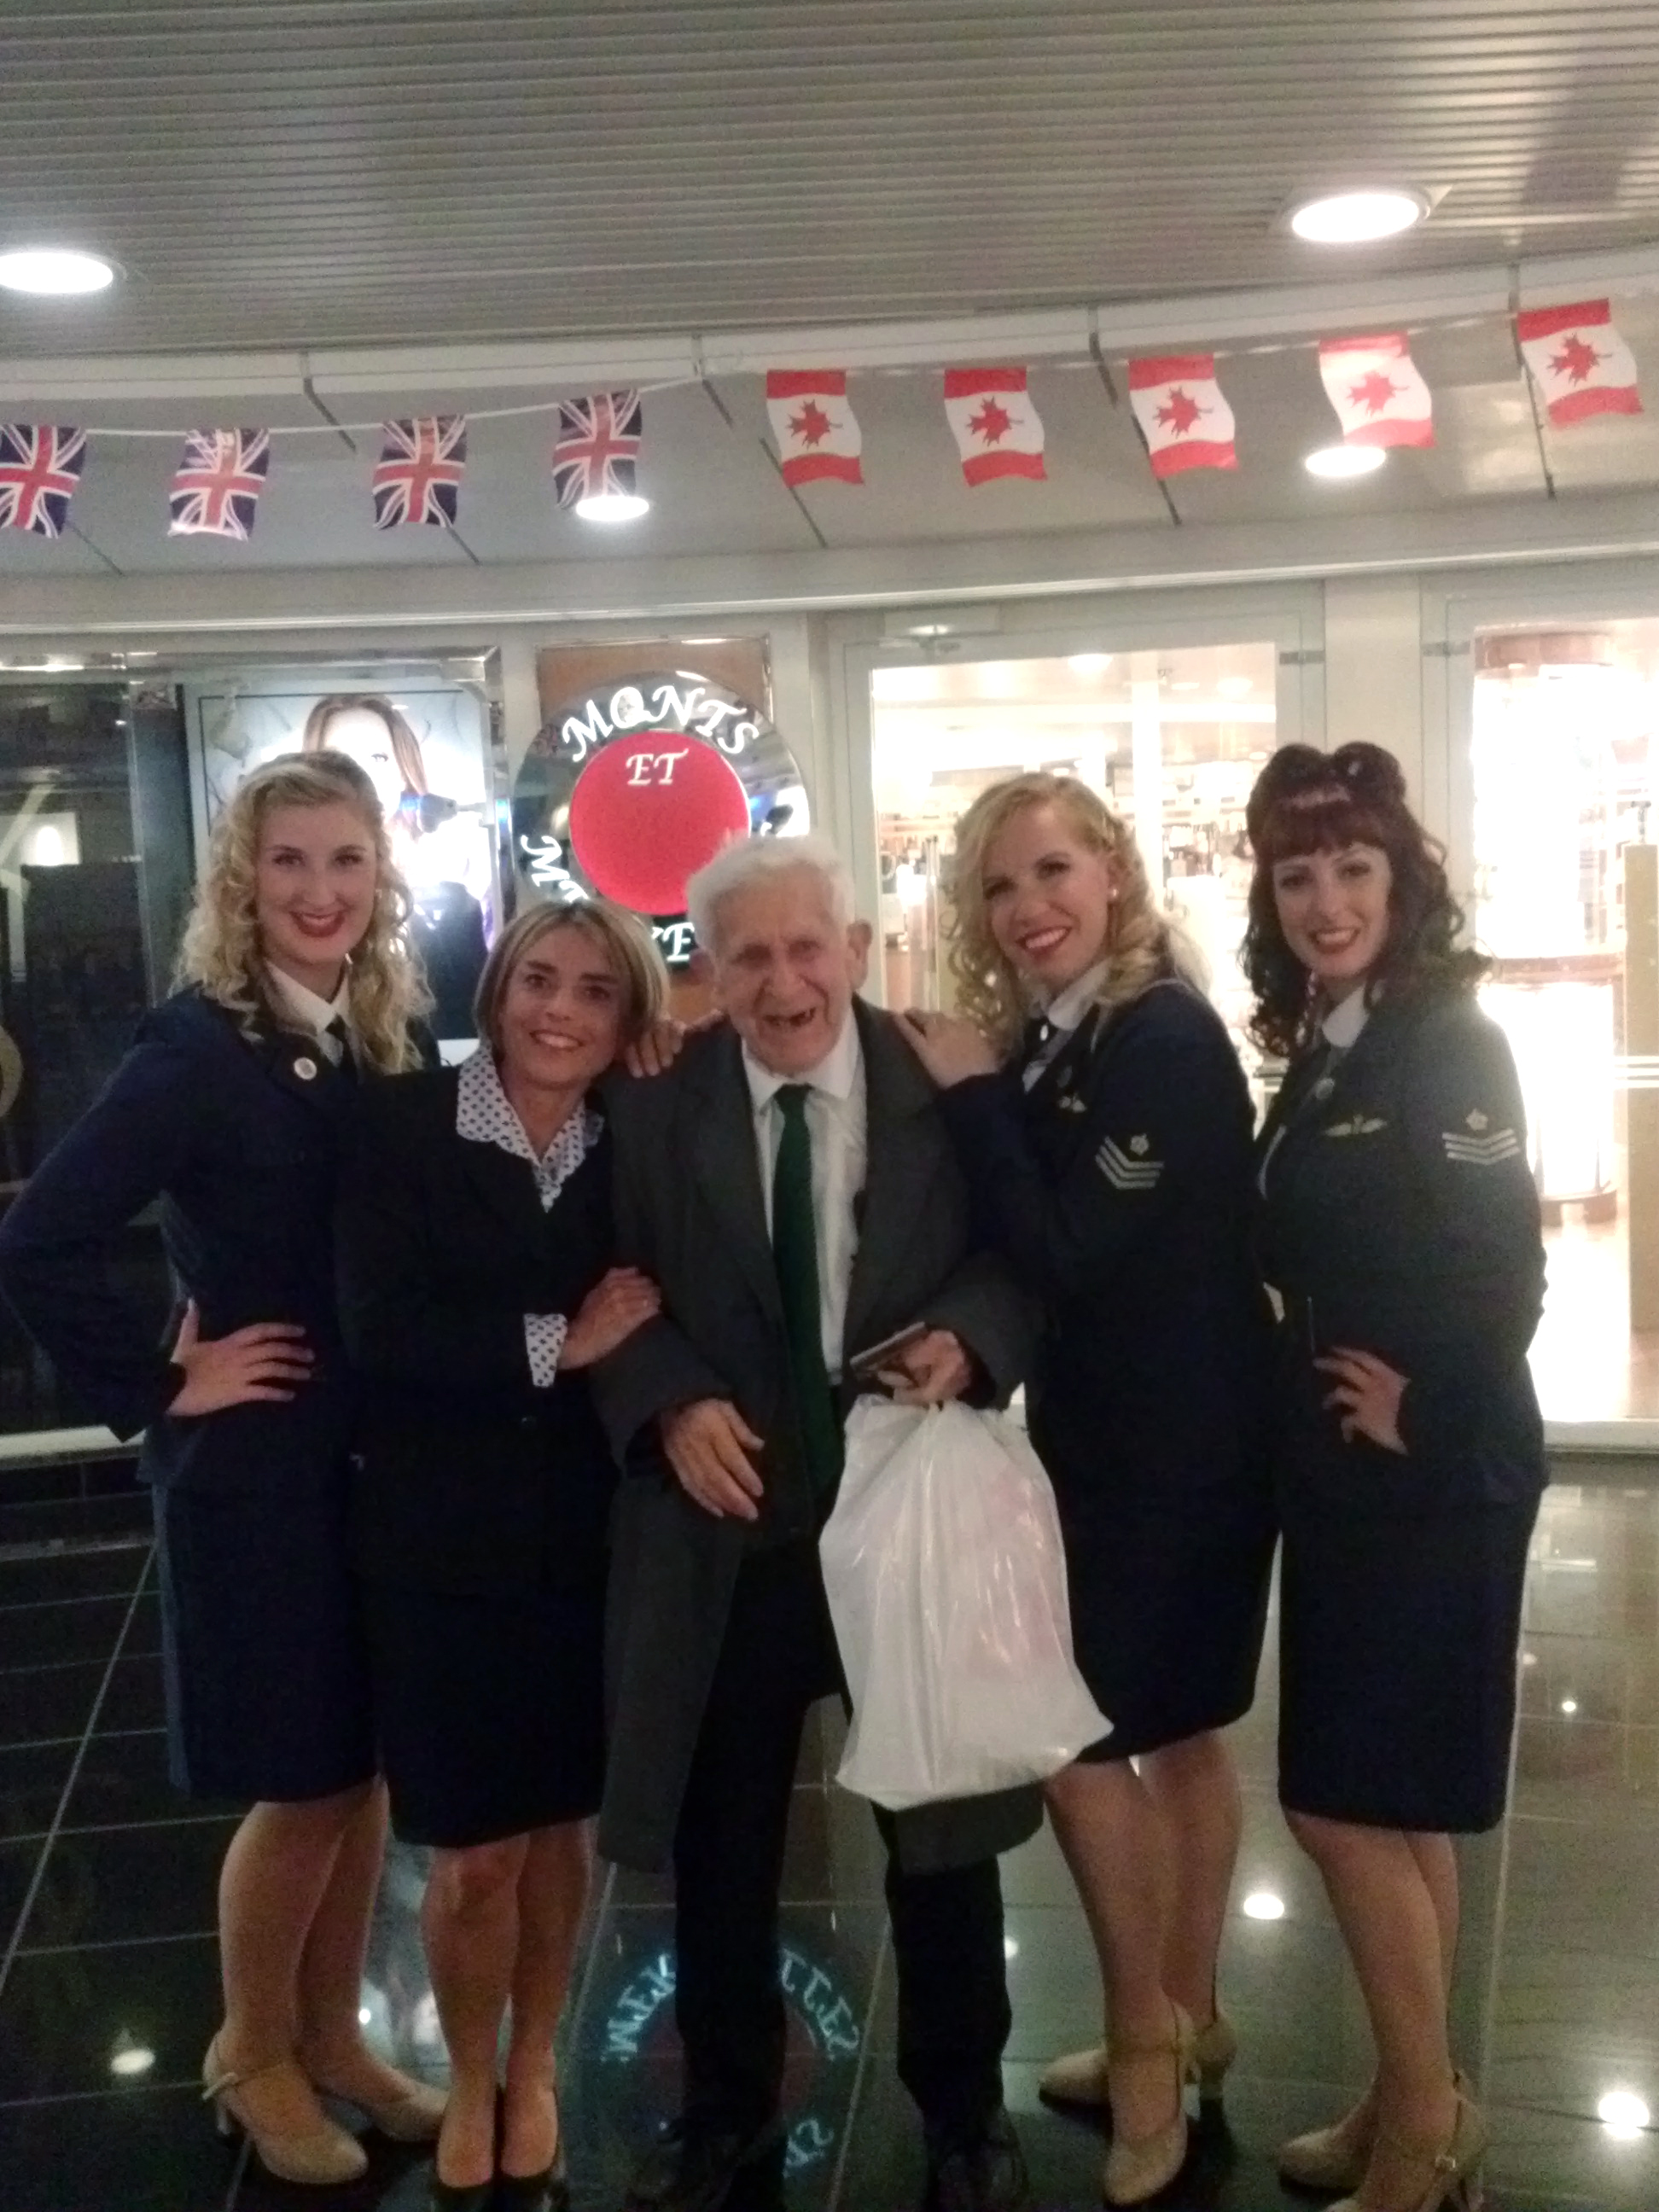 PHOTO: British D-Day veteran Bernard Jordan, 89, sneaked out of a nursing home on England's south coast on Thursday and turned up in Normandy today to mark the invasion's 70th anniversary, authorities said.